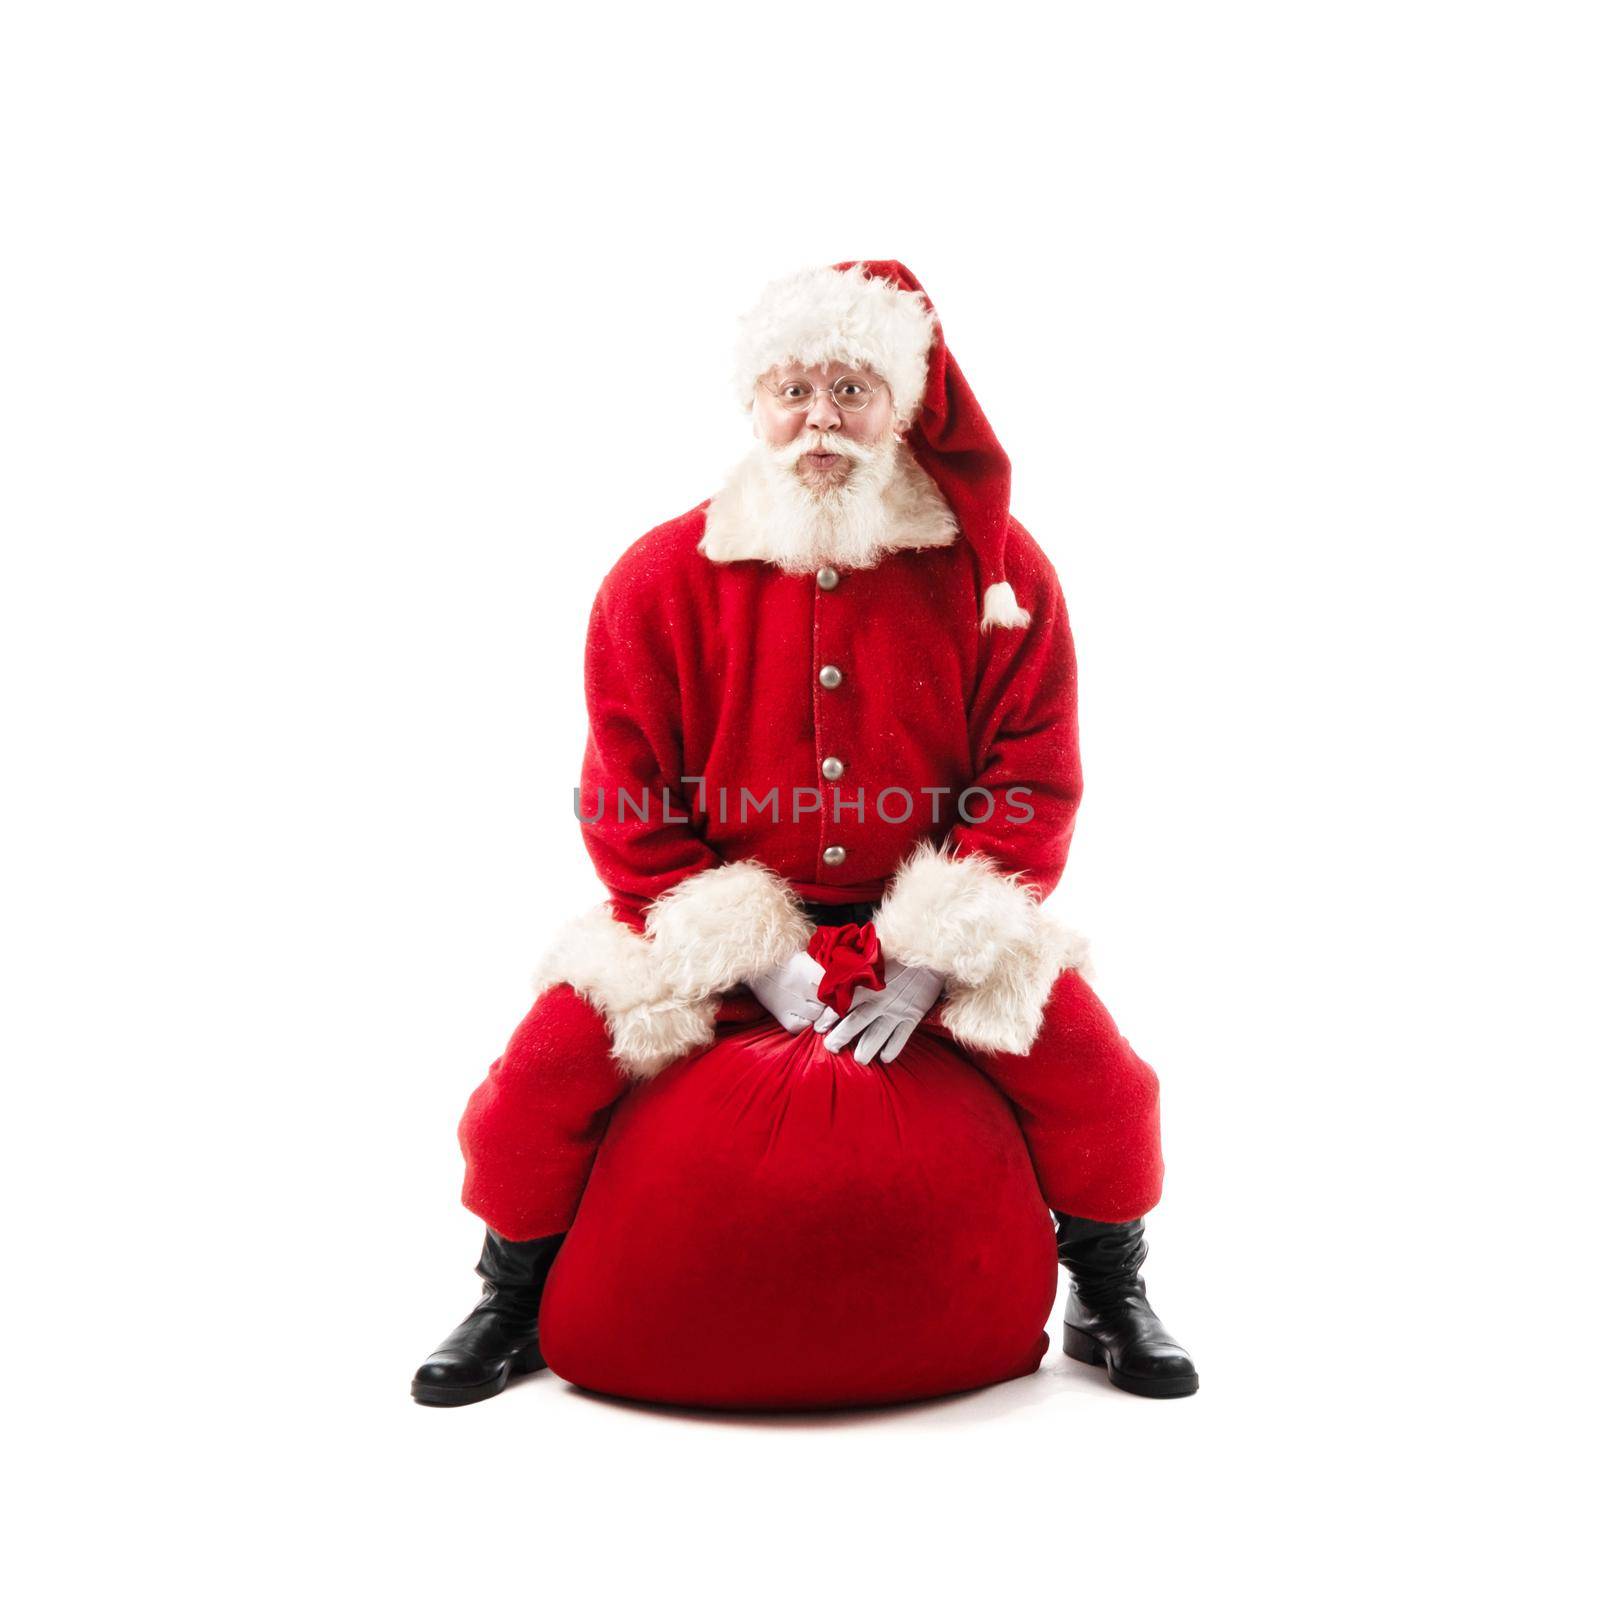 Santa Claus sitting on gift bag by ALotOfPeople